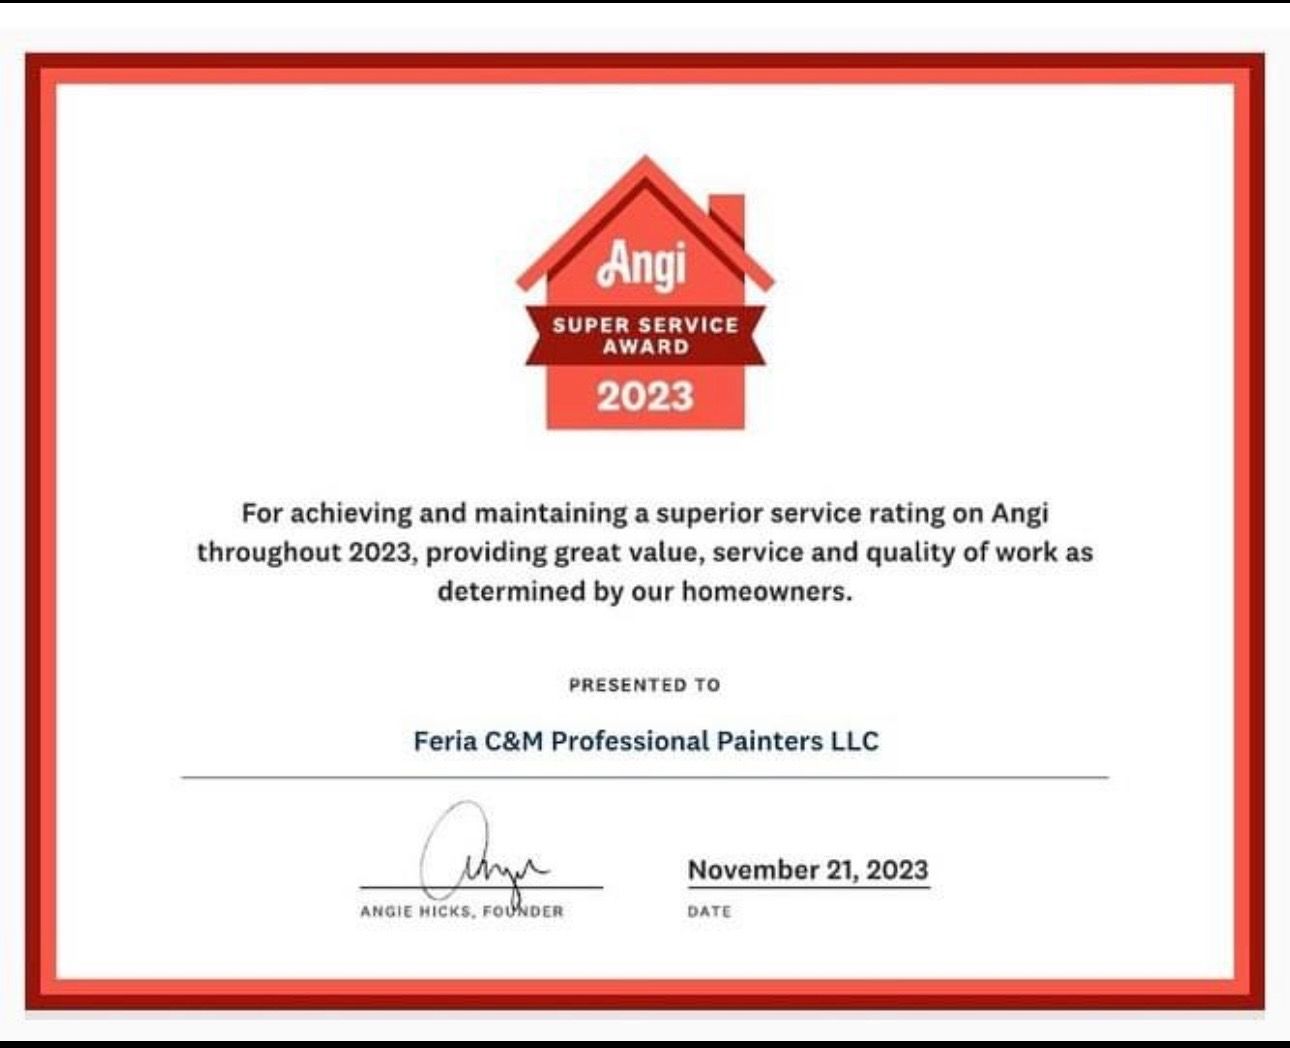 An angi super service award for achieving and maintaining a superior service rating on angi throughout 2023